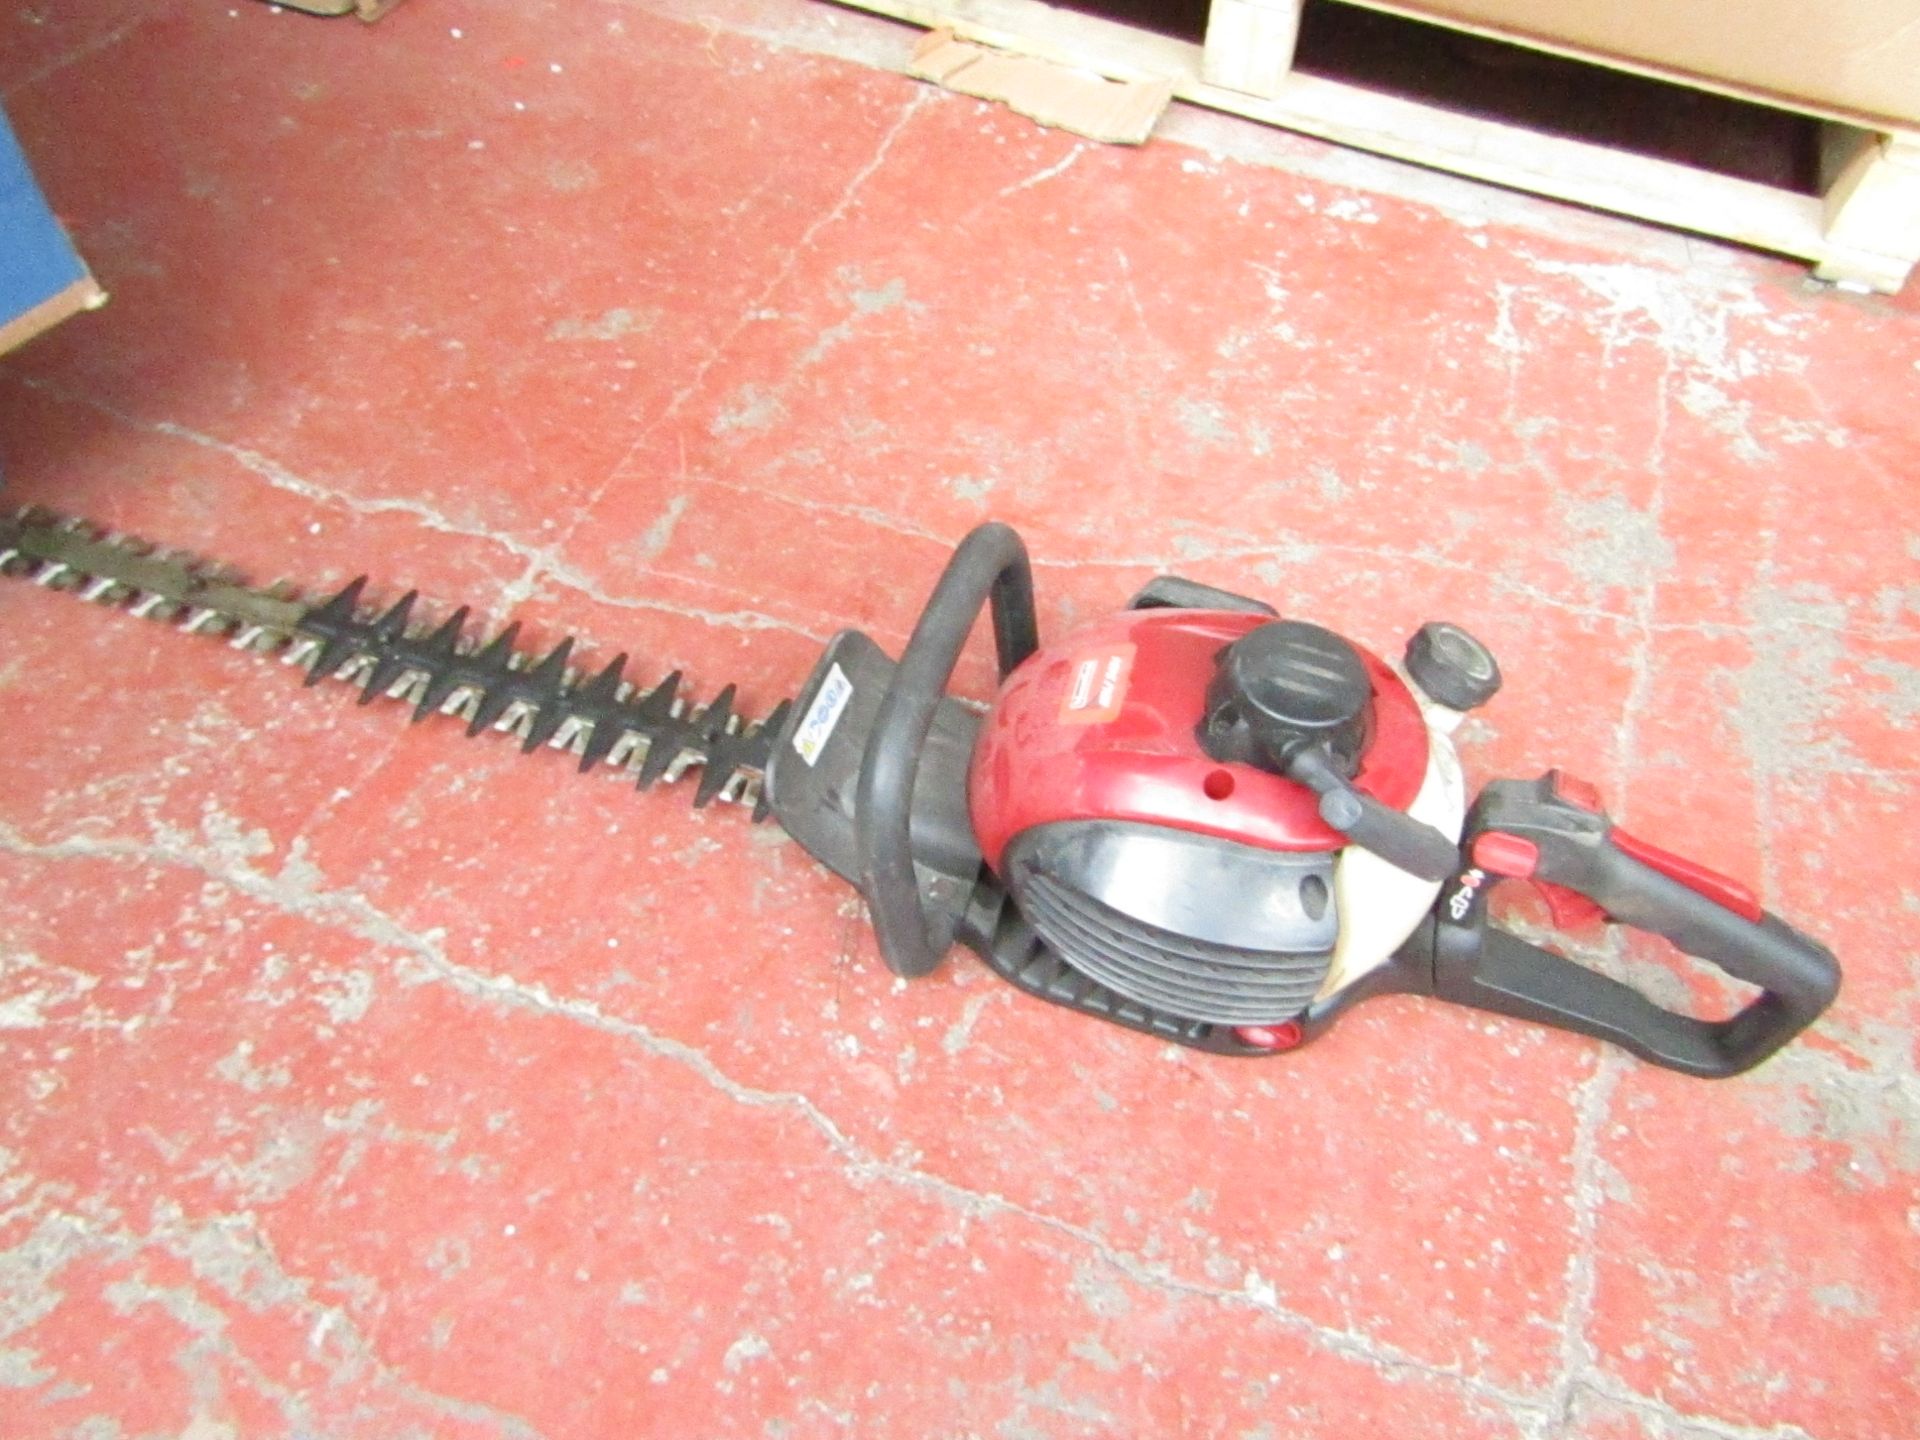 Mountfield MHJ2424 Petrol hedge trimmer, was in working condition before it arrived